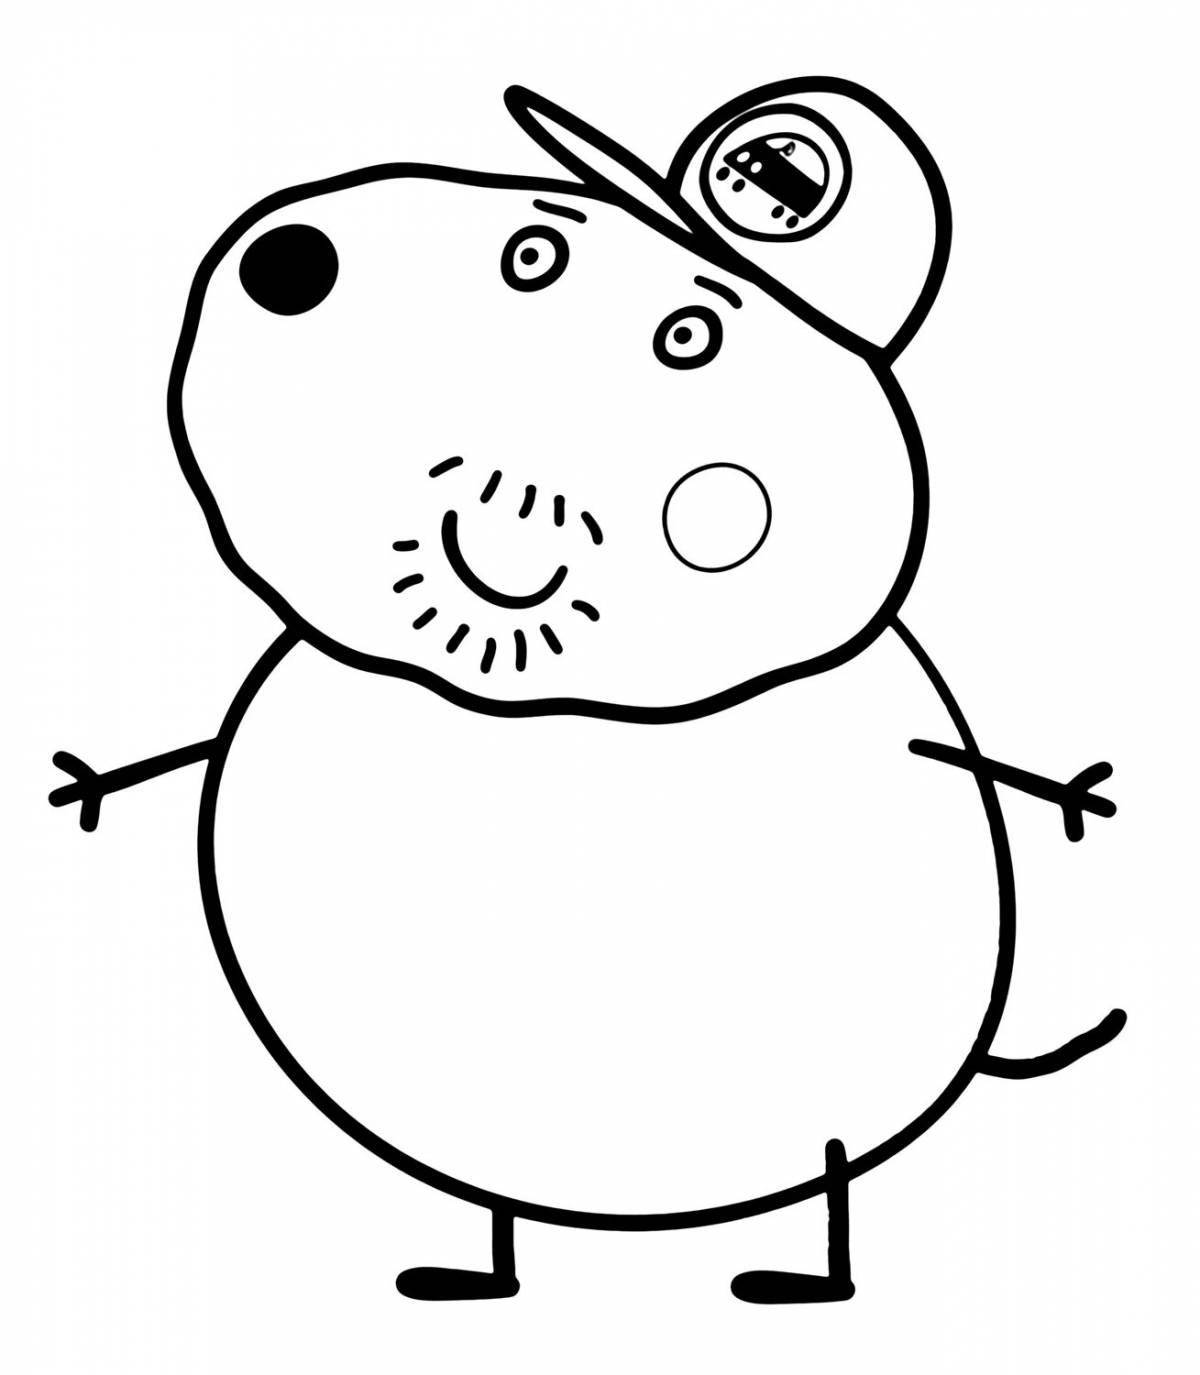 Coloring page cheerful peppa pig the frog